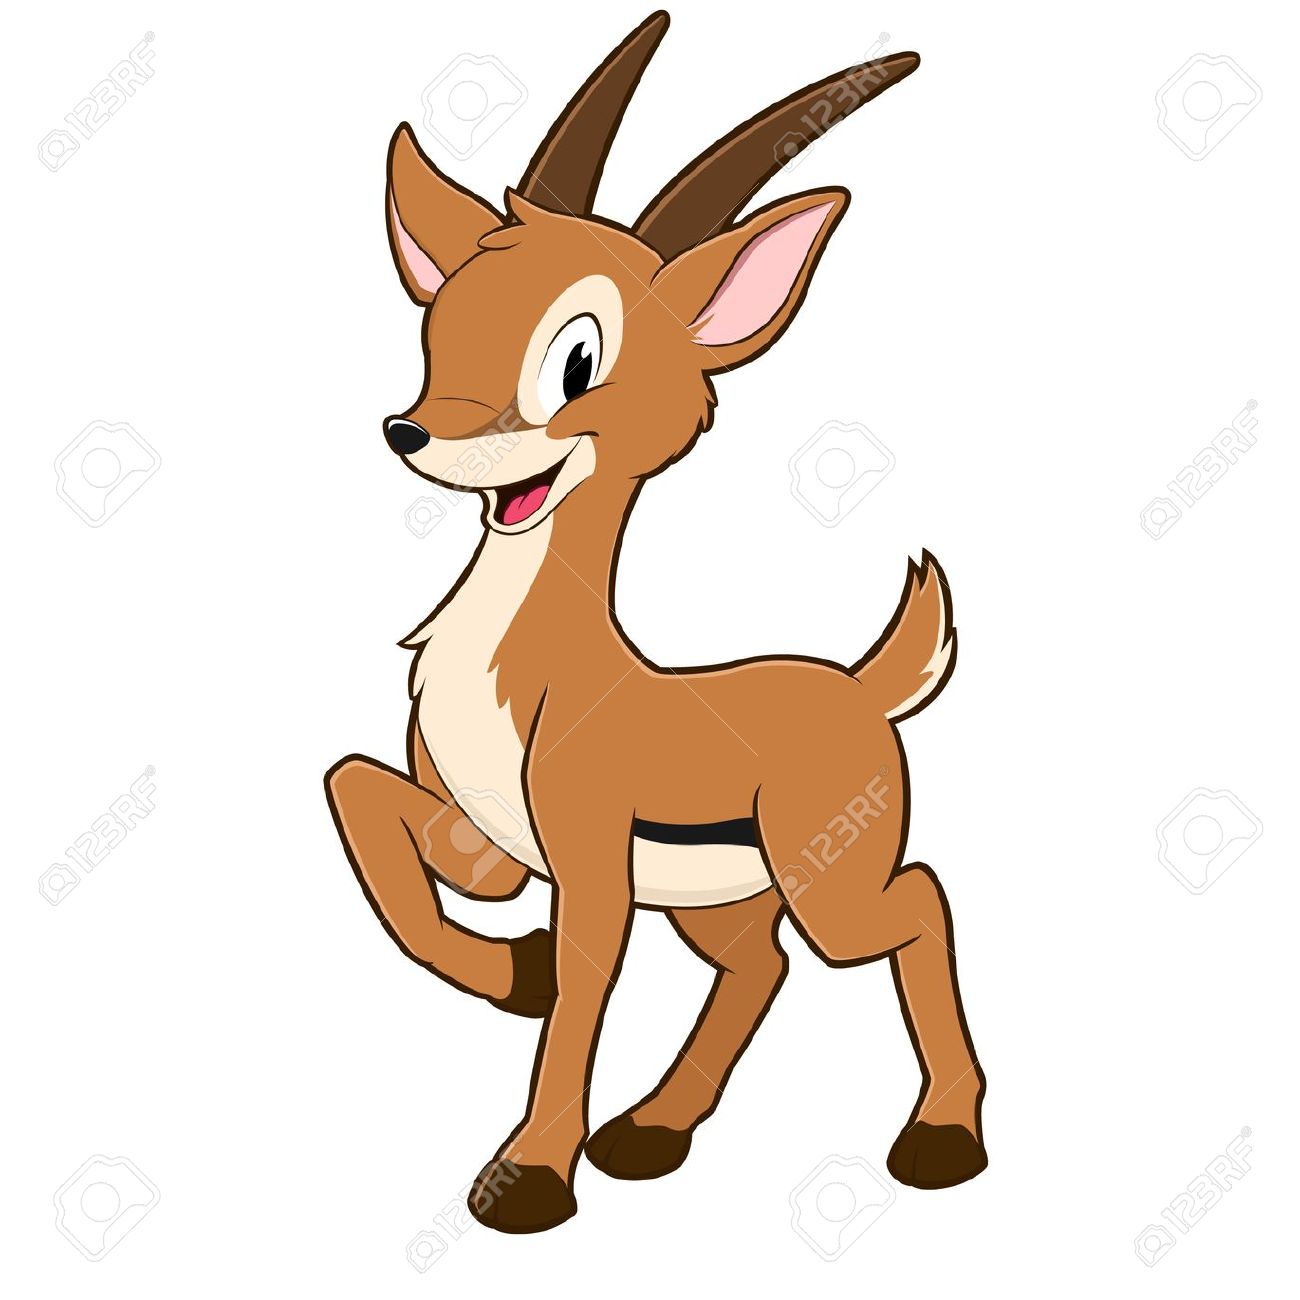 Gazelle clipart #7, Download drawings